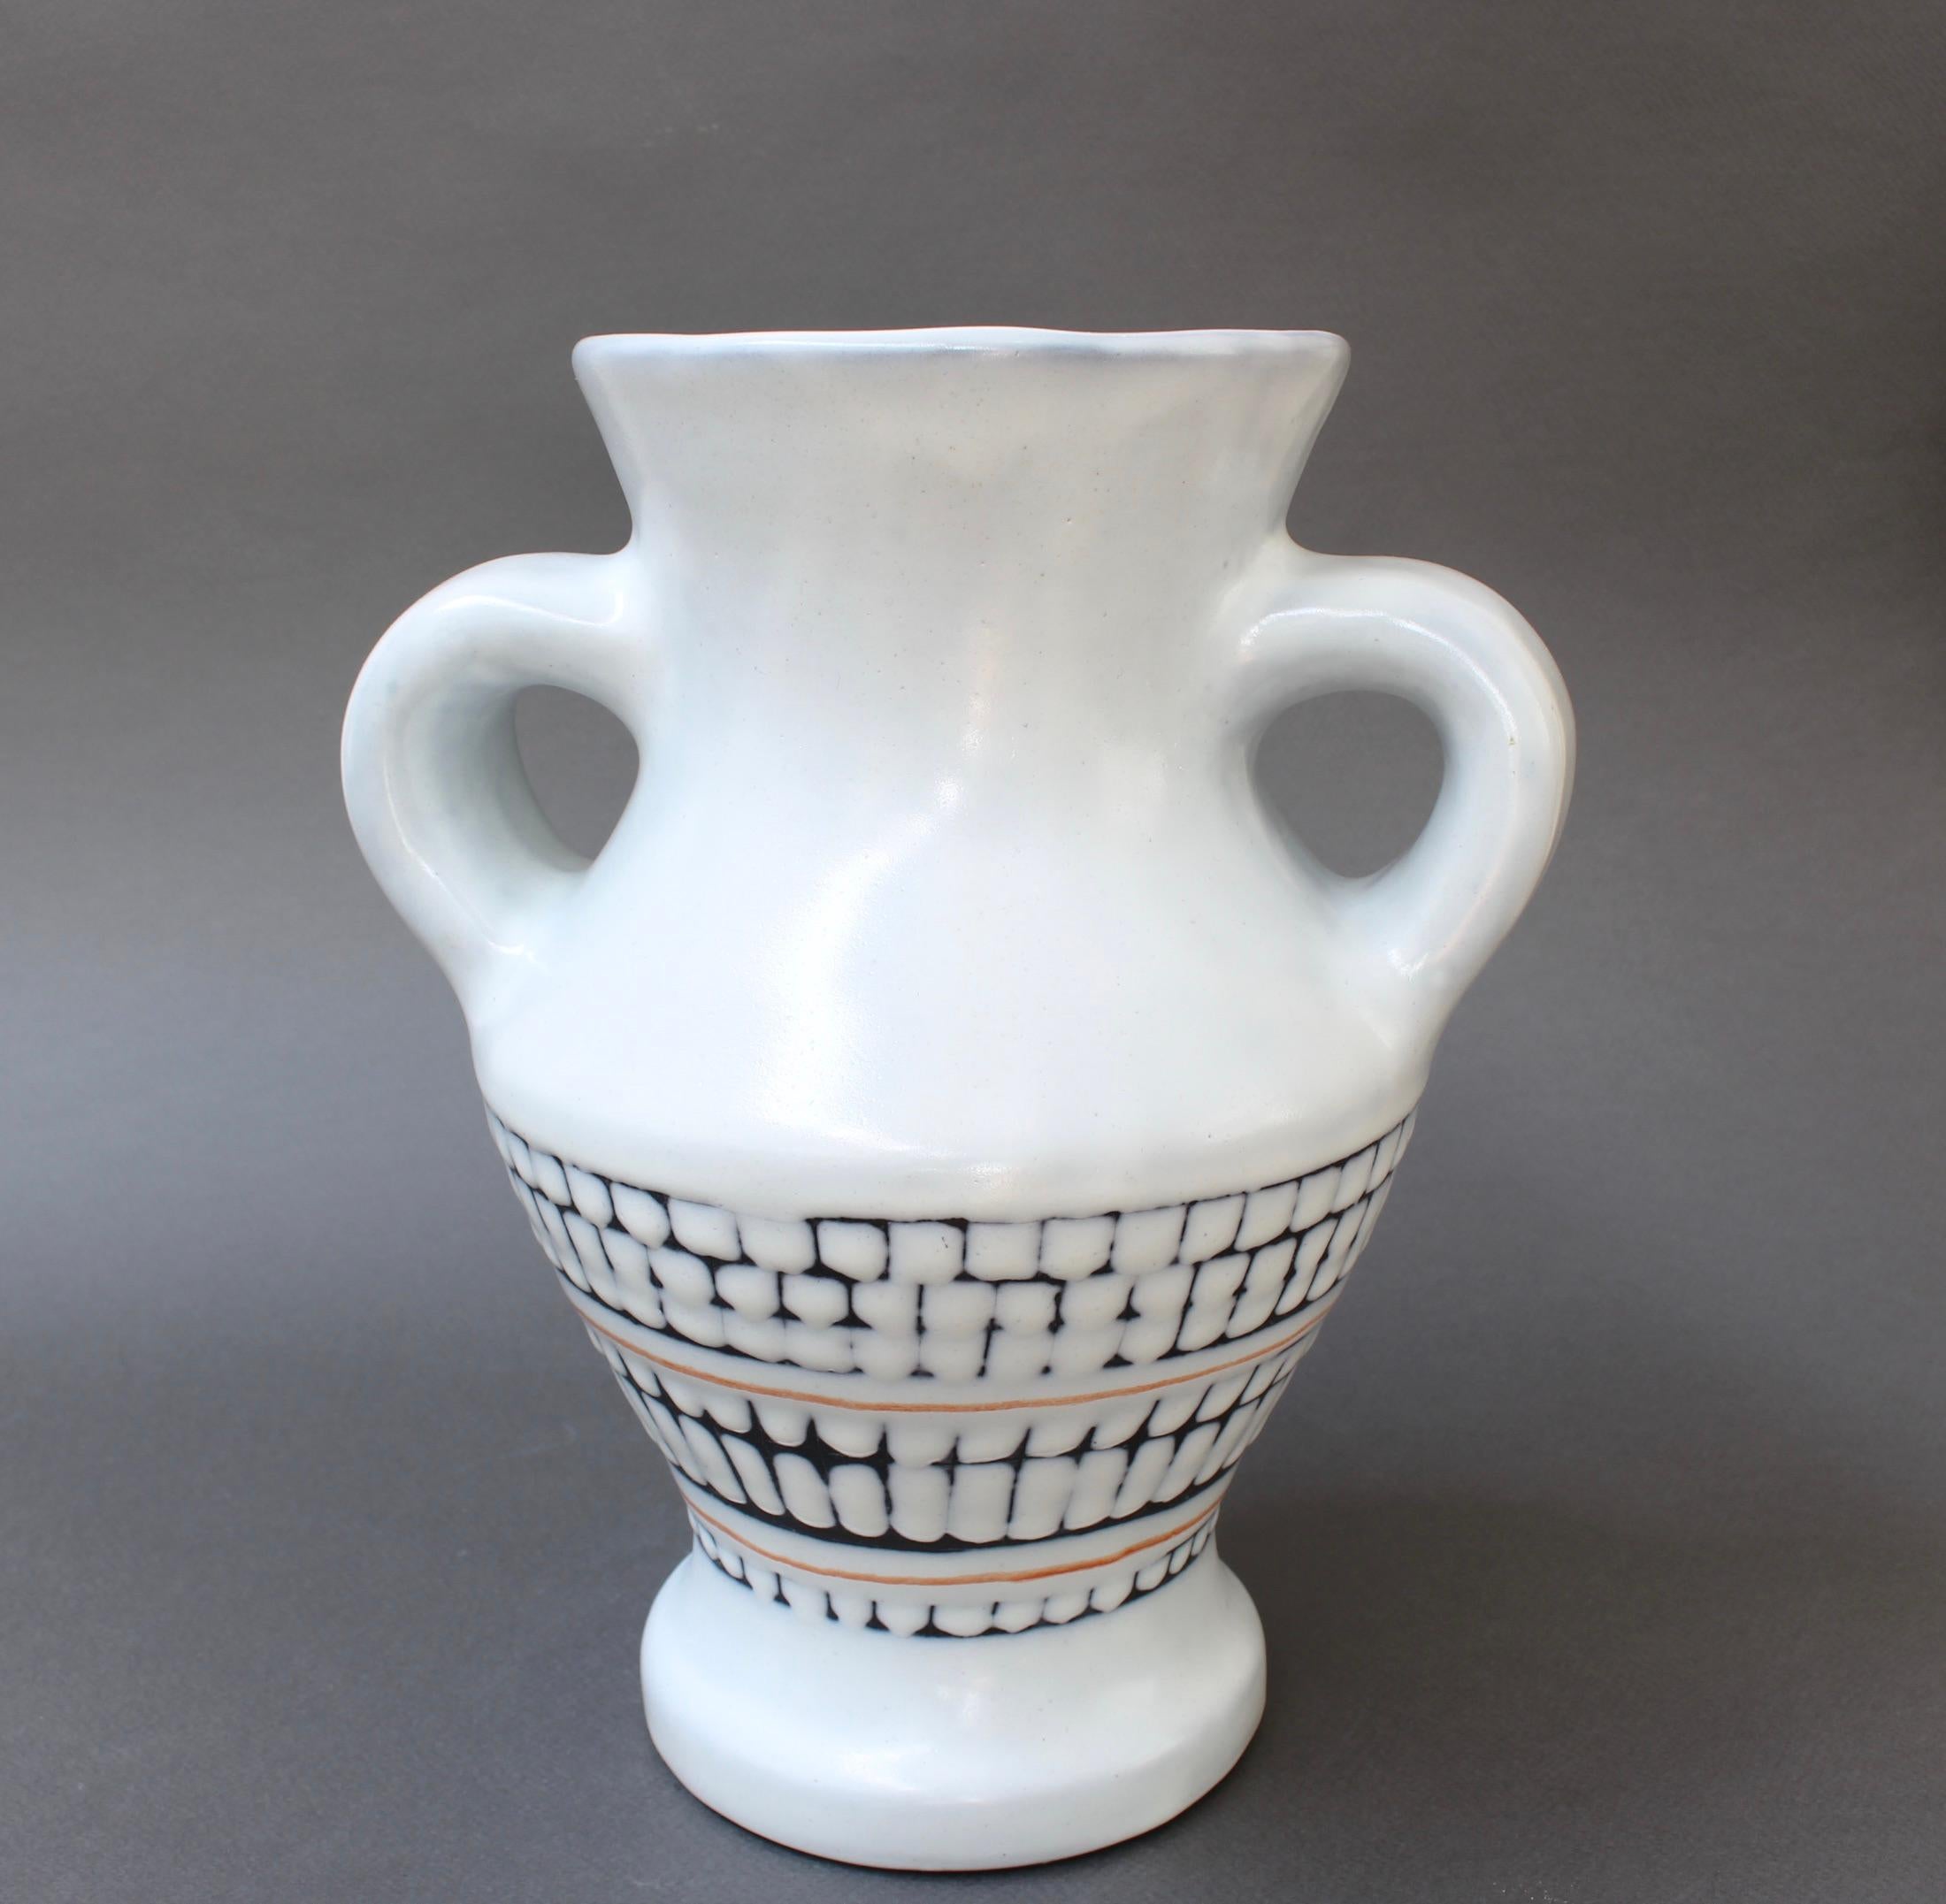 Vintage French Ceramic Vase with Handles by Roger Capron, 'circa 1950s' For Sale 1